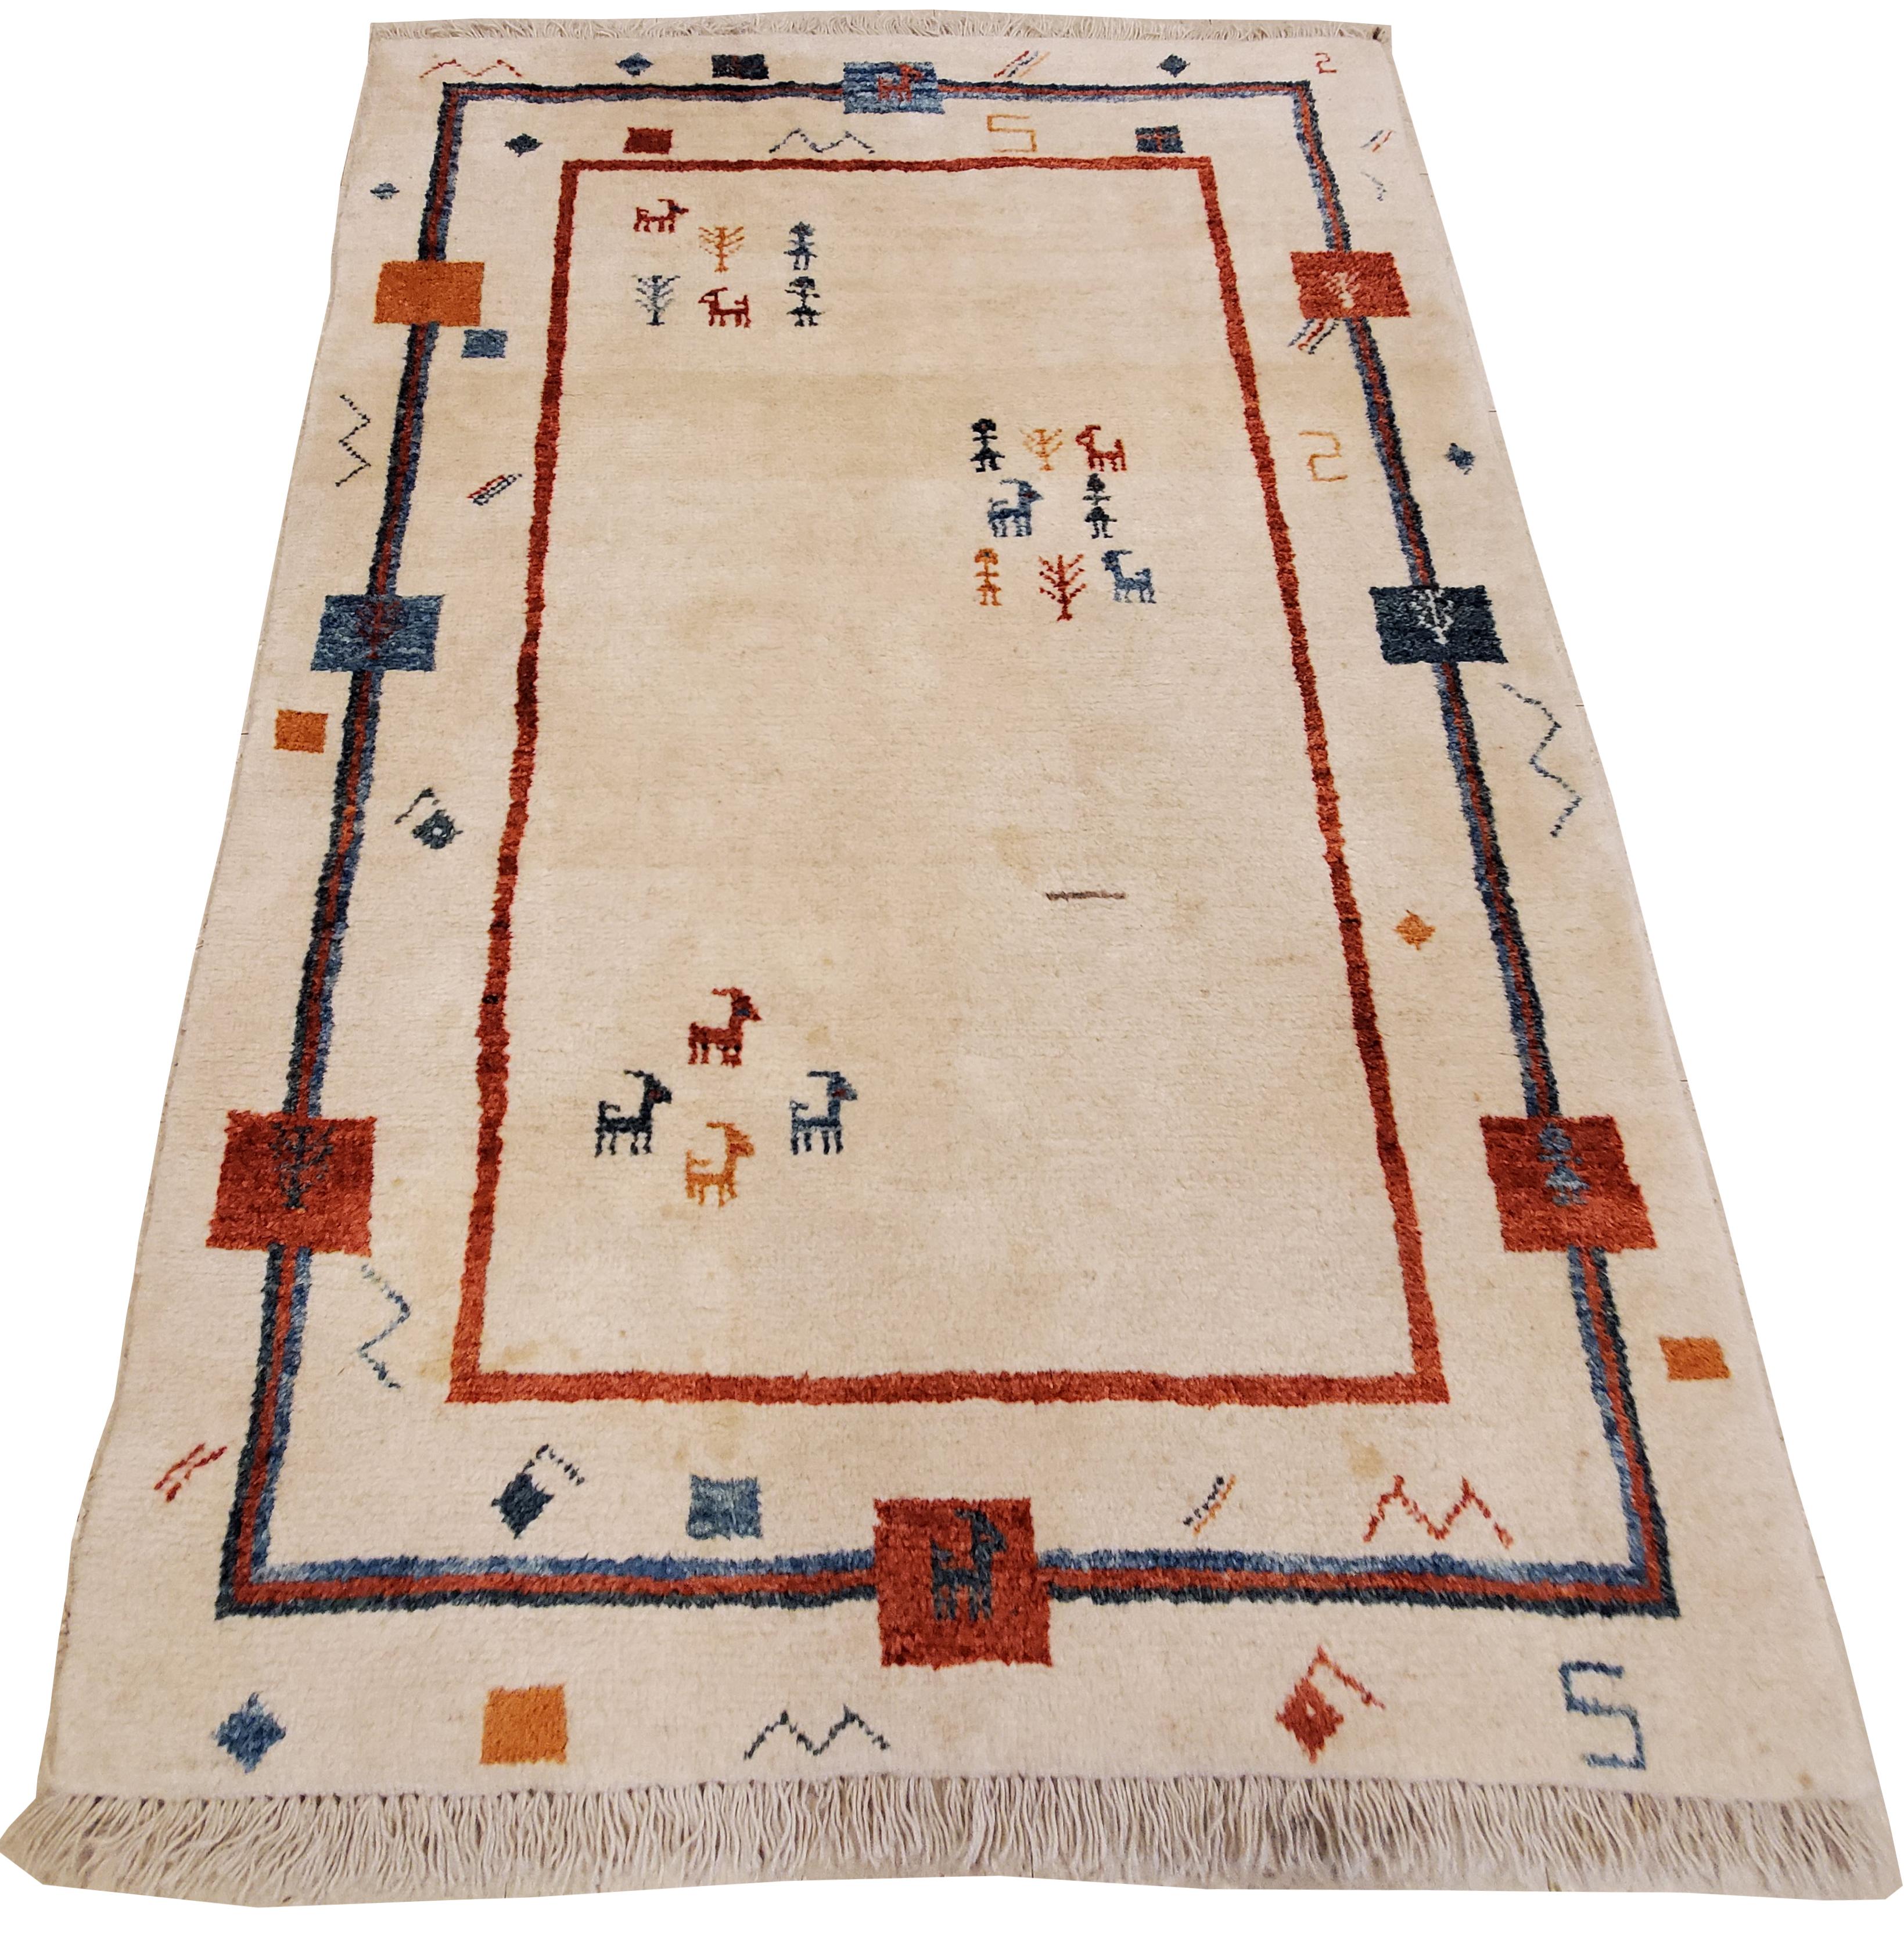 A whimsical vintage Persian Gabbeh rug with an natural creamy ivory/white background and a beautiful open design boarder. Extra high pile wool ornate with characteristic designs.